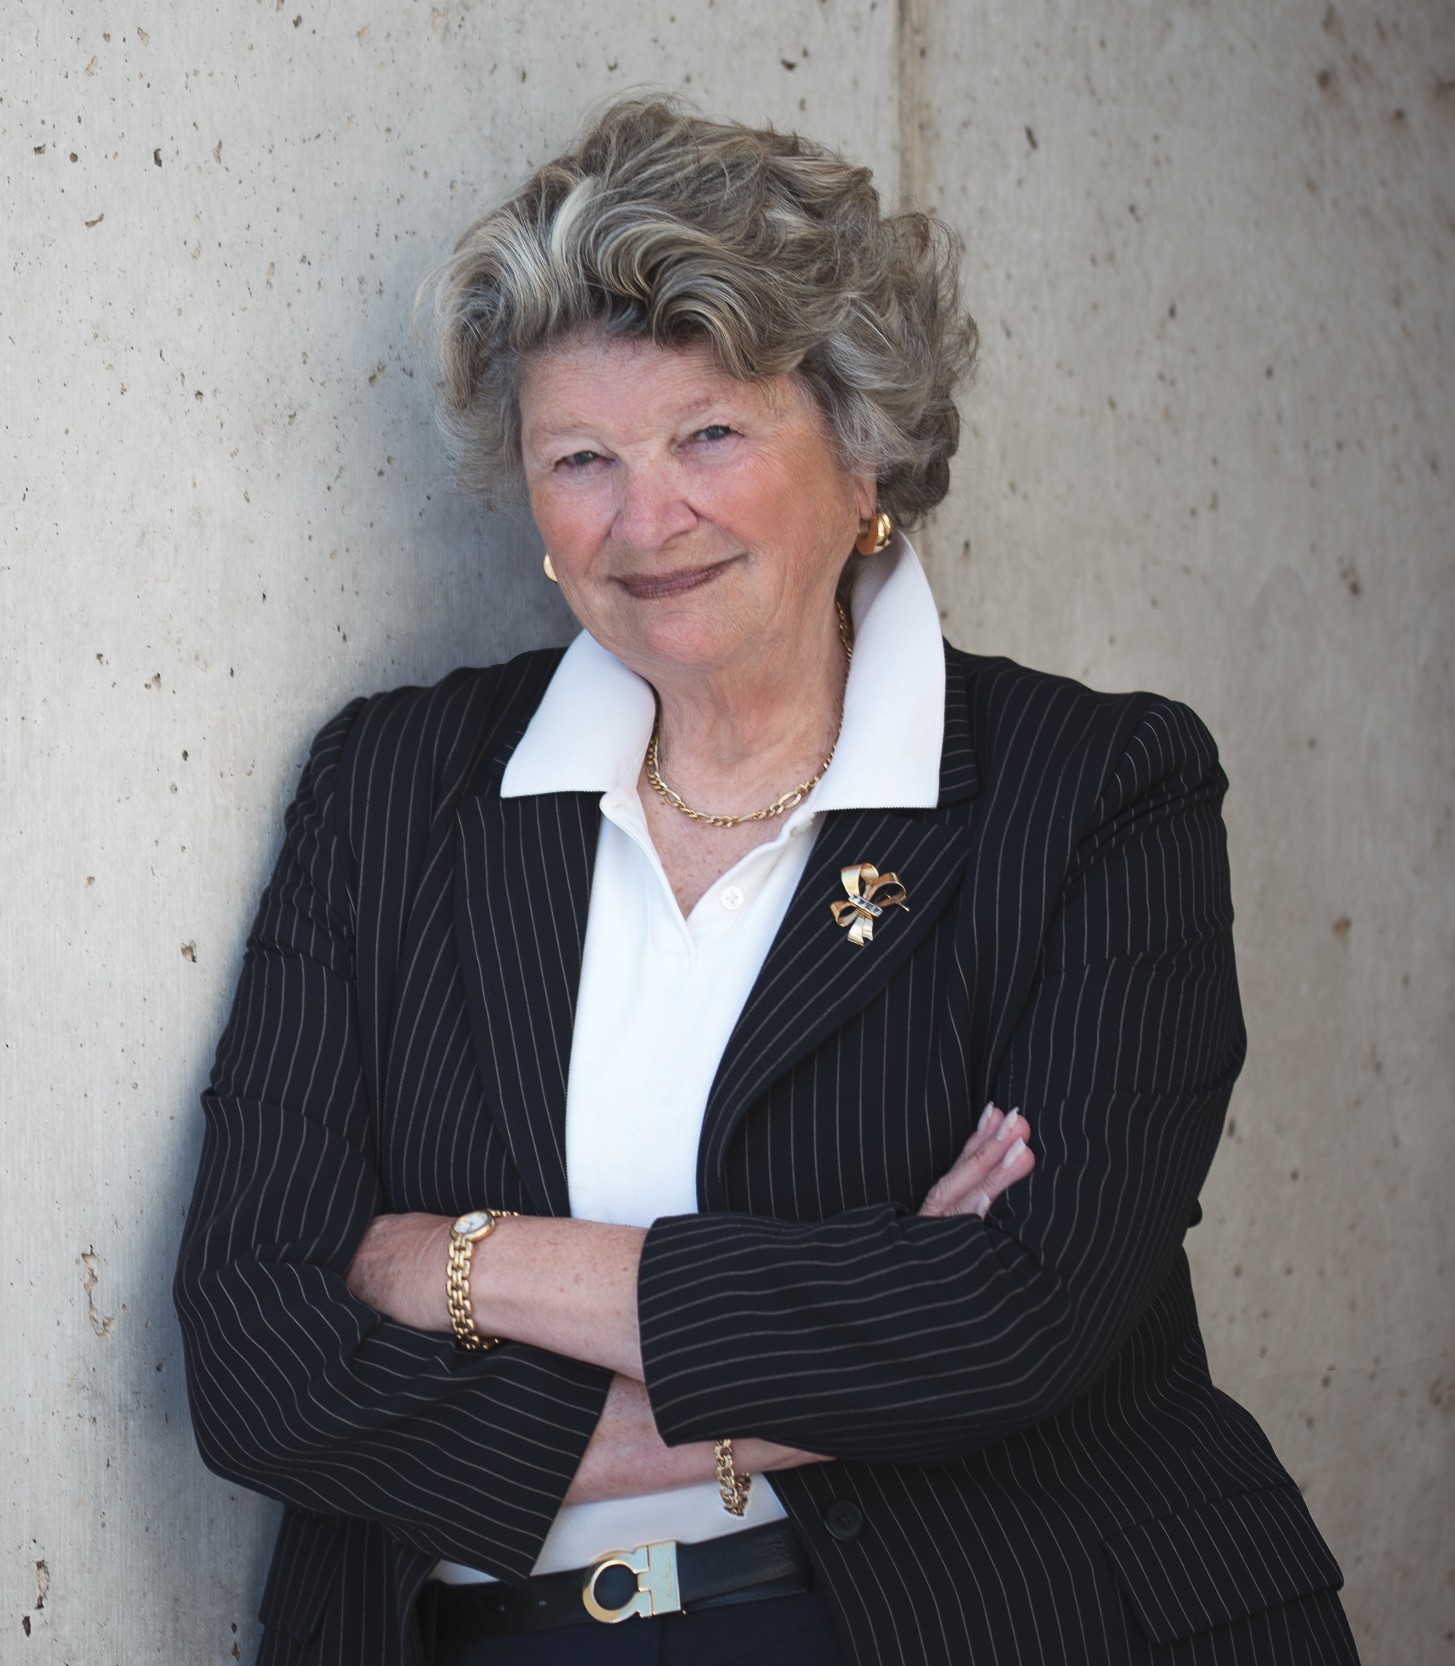 Dr. Mary Walshok | Photo courtesy of “What’s Up Down South,” St. George News